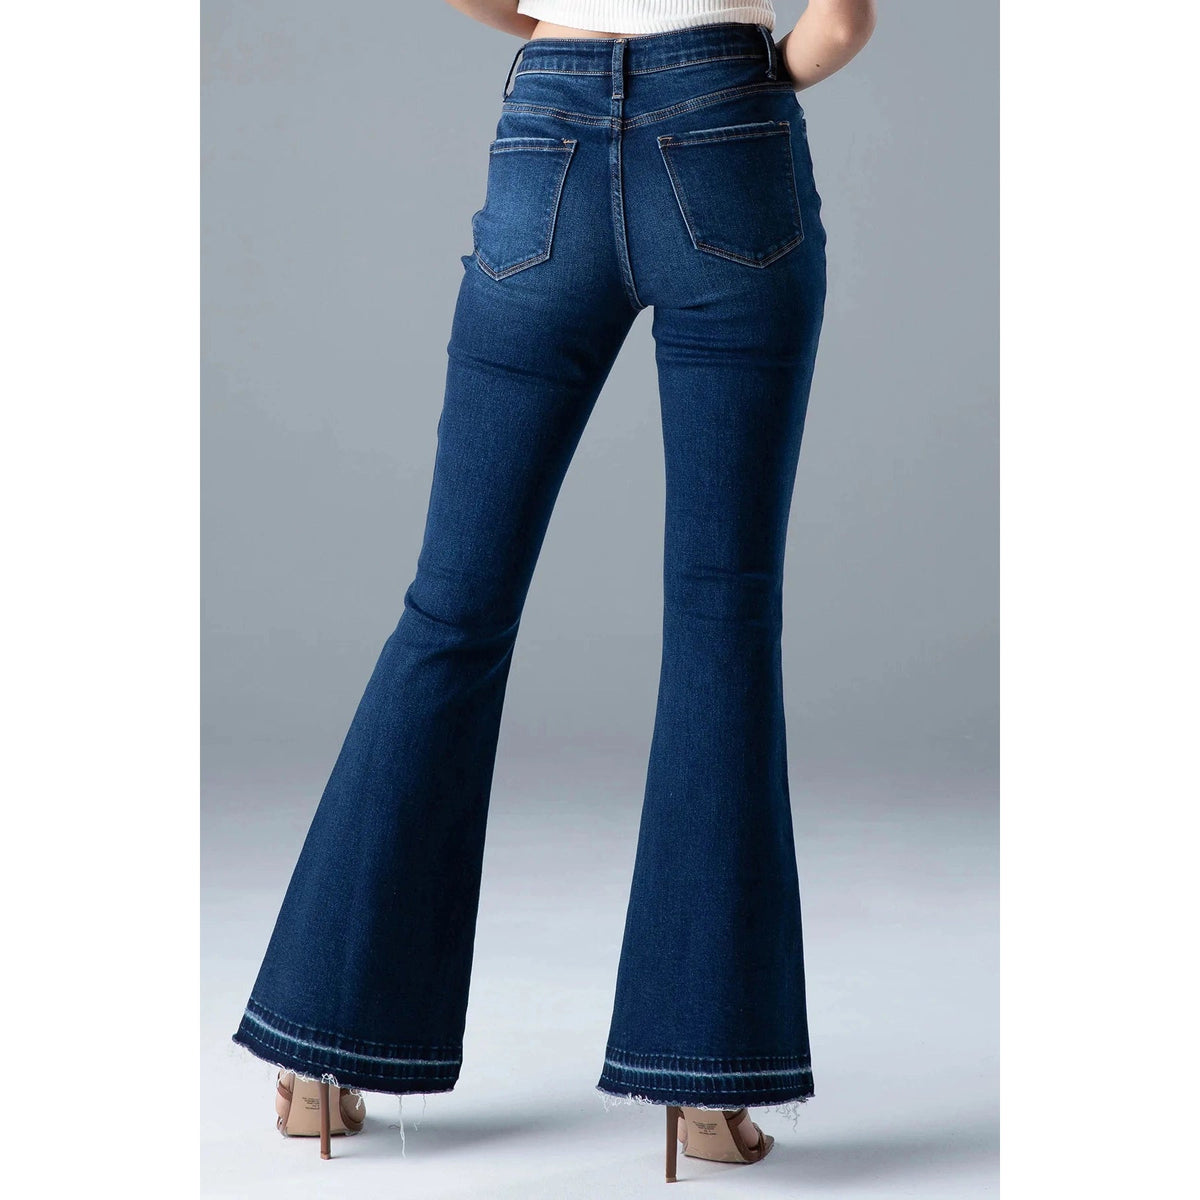 Tween Girls High Rise Cropped Flare Jeans